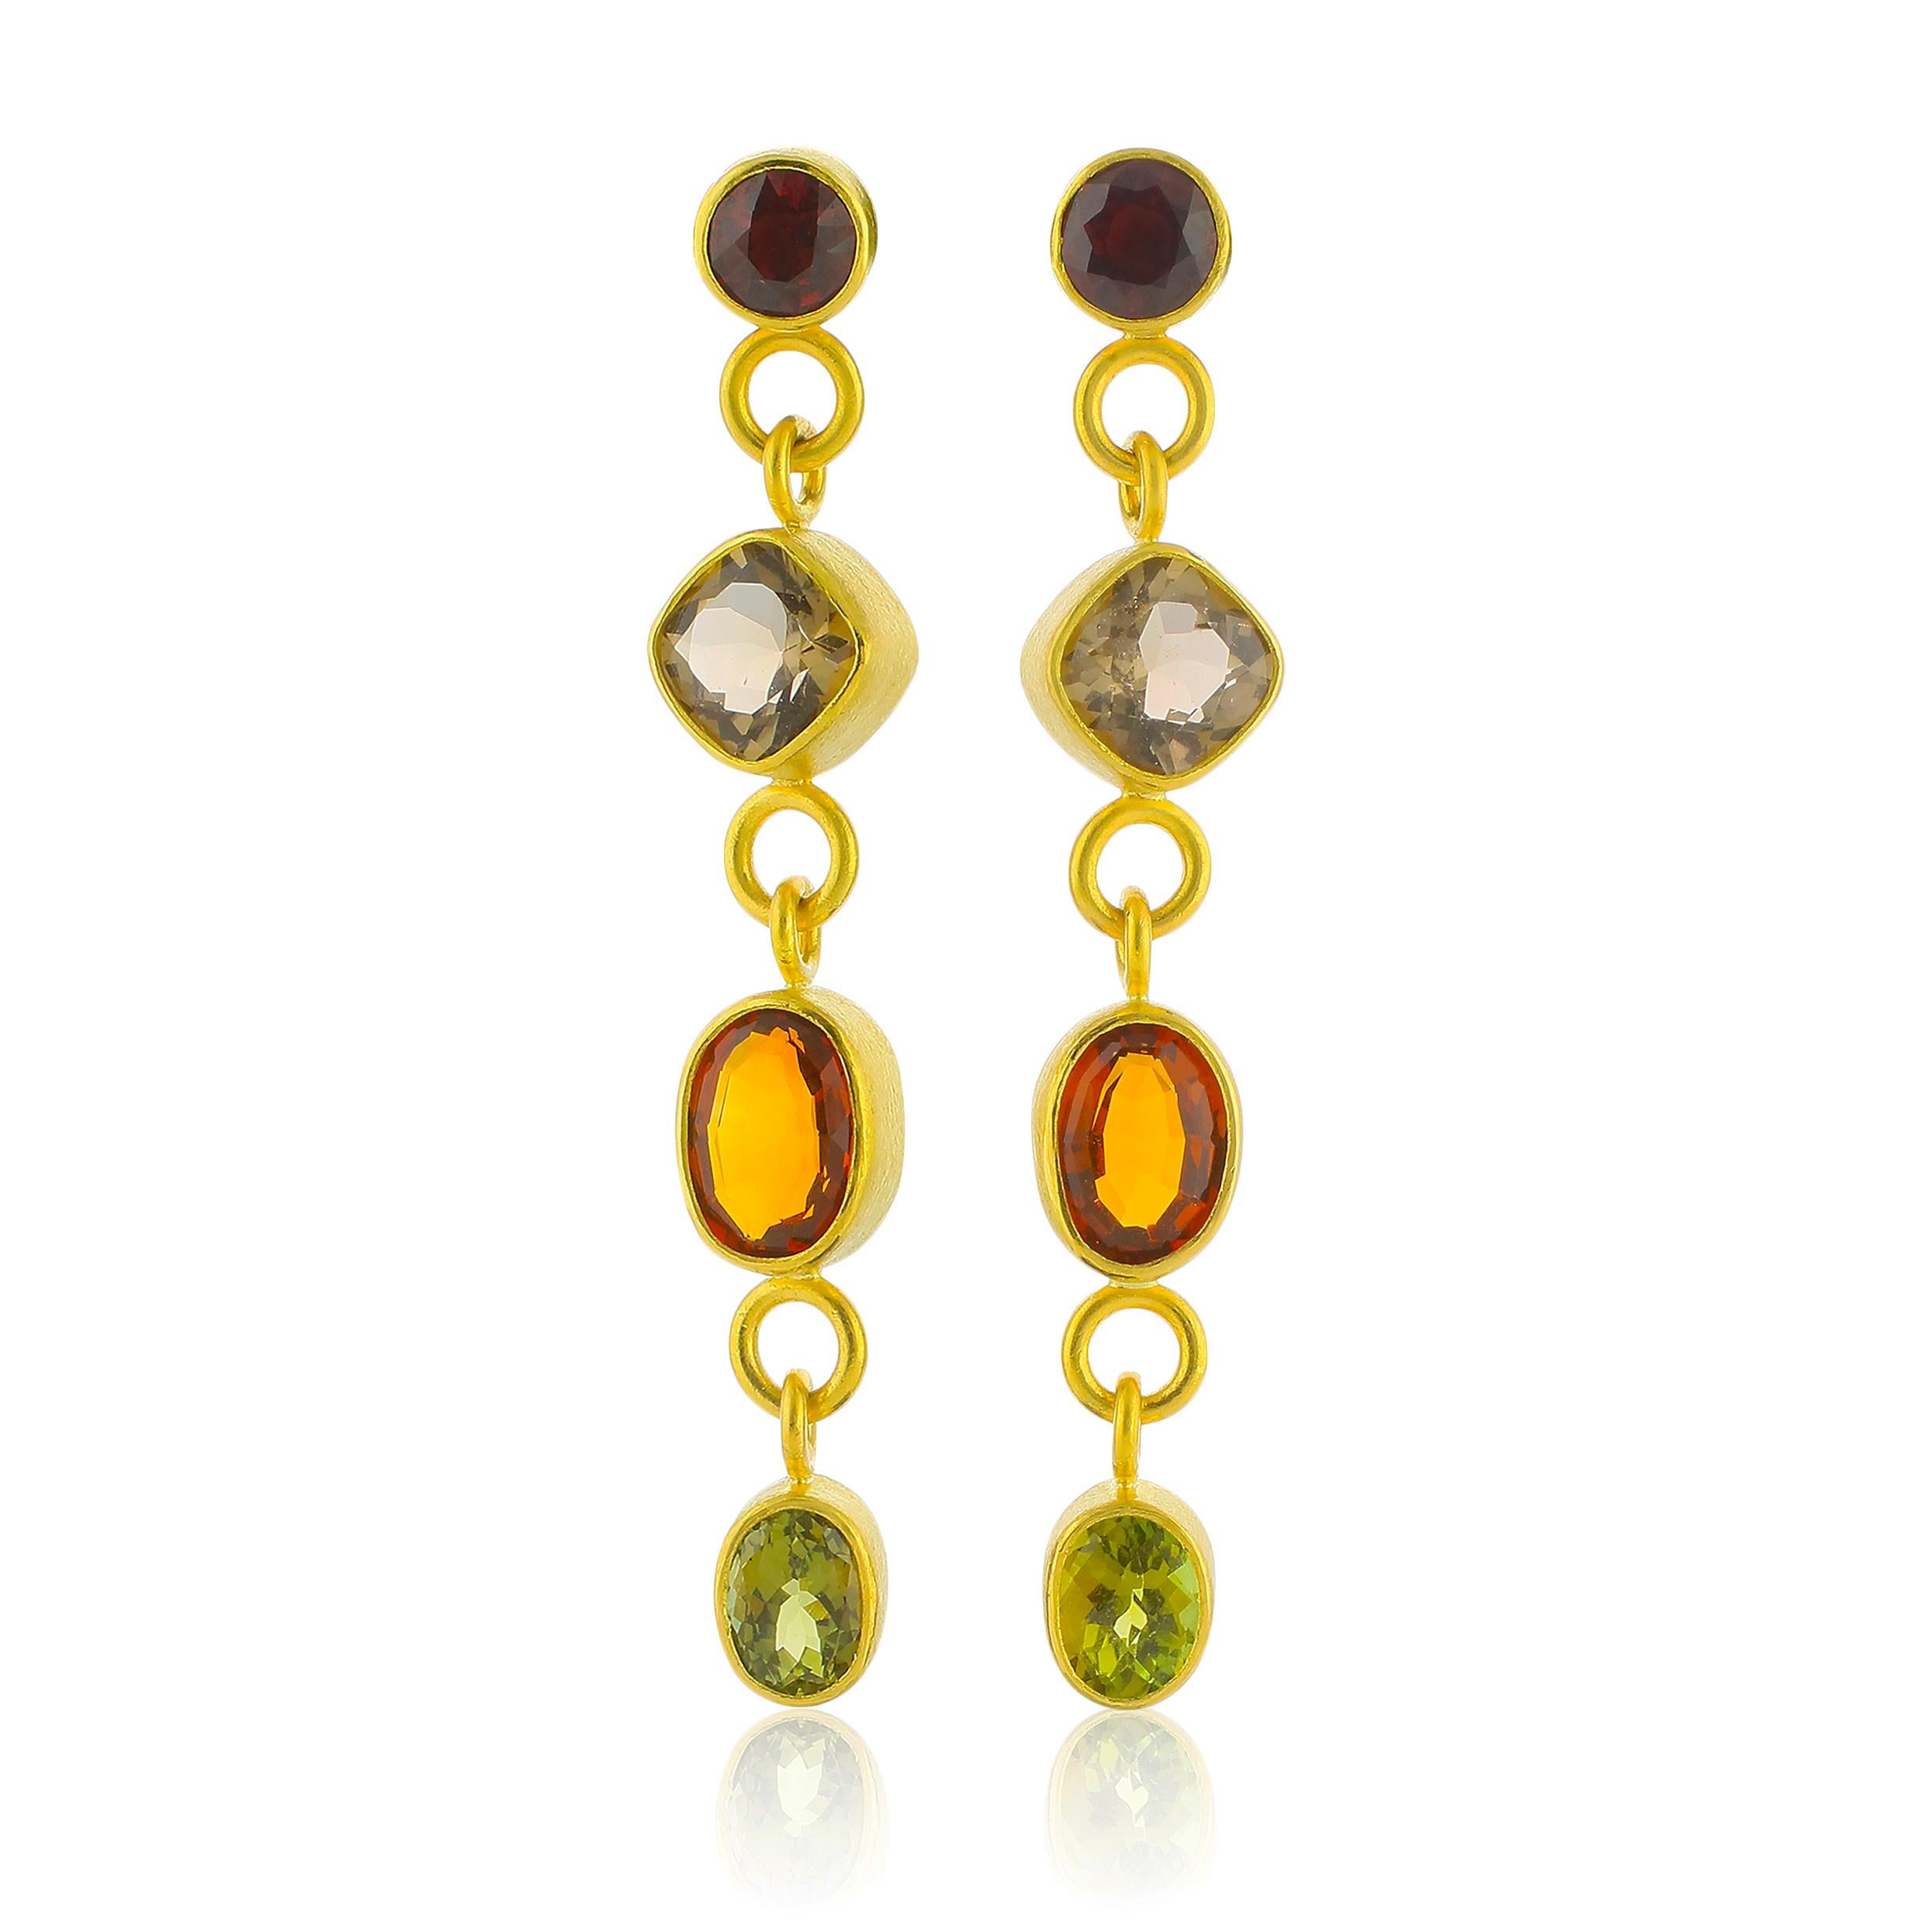 Artisan PHILIPPE SPENCER - Pure 22K Gold Mixed-Gem Dangling Statement Earrings For Sale